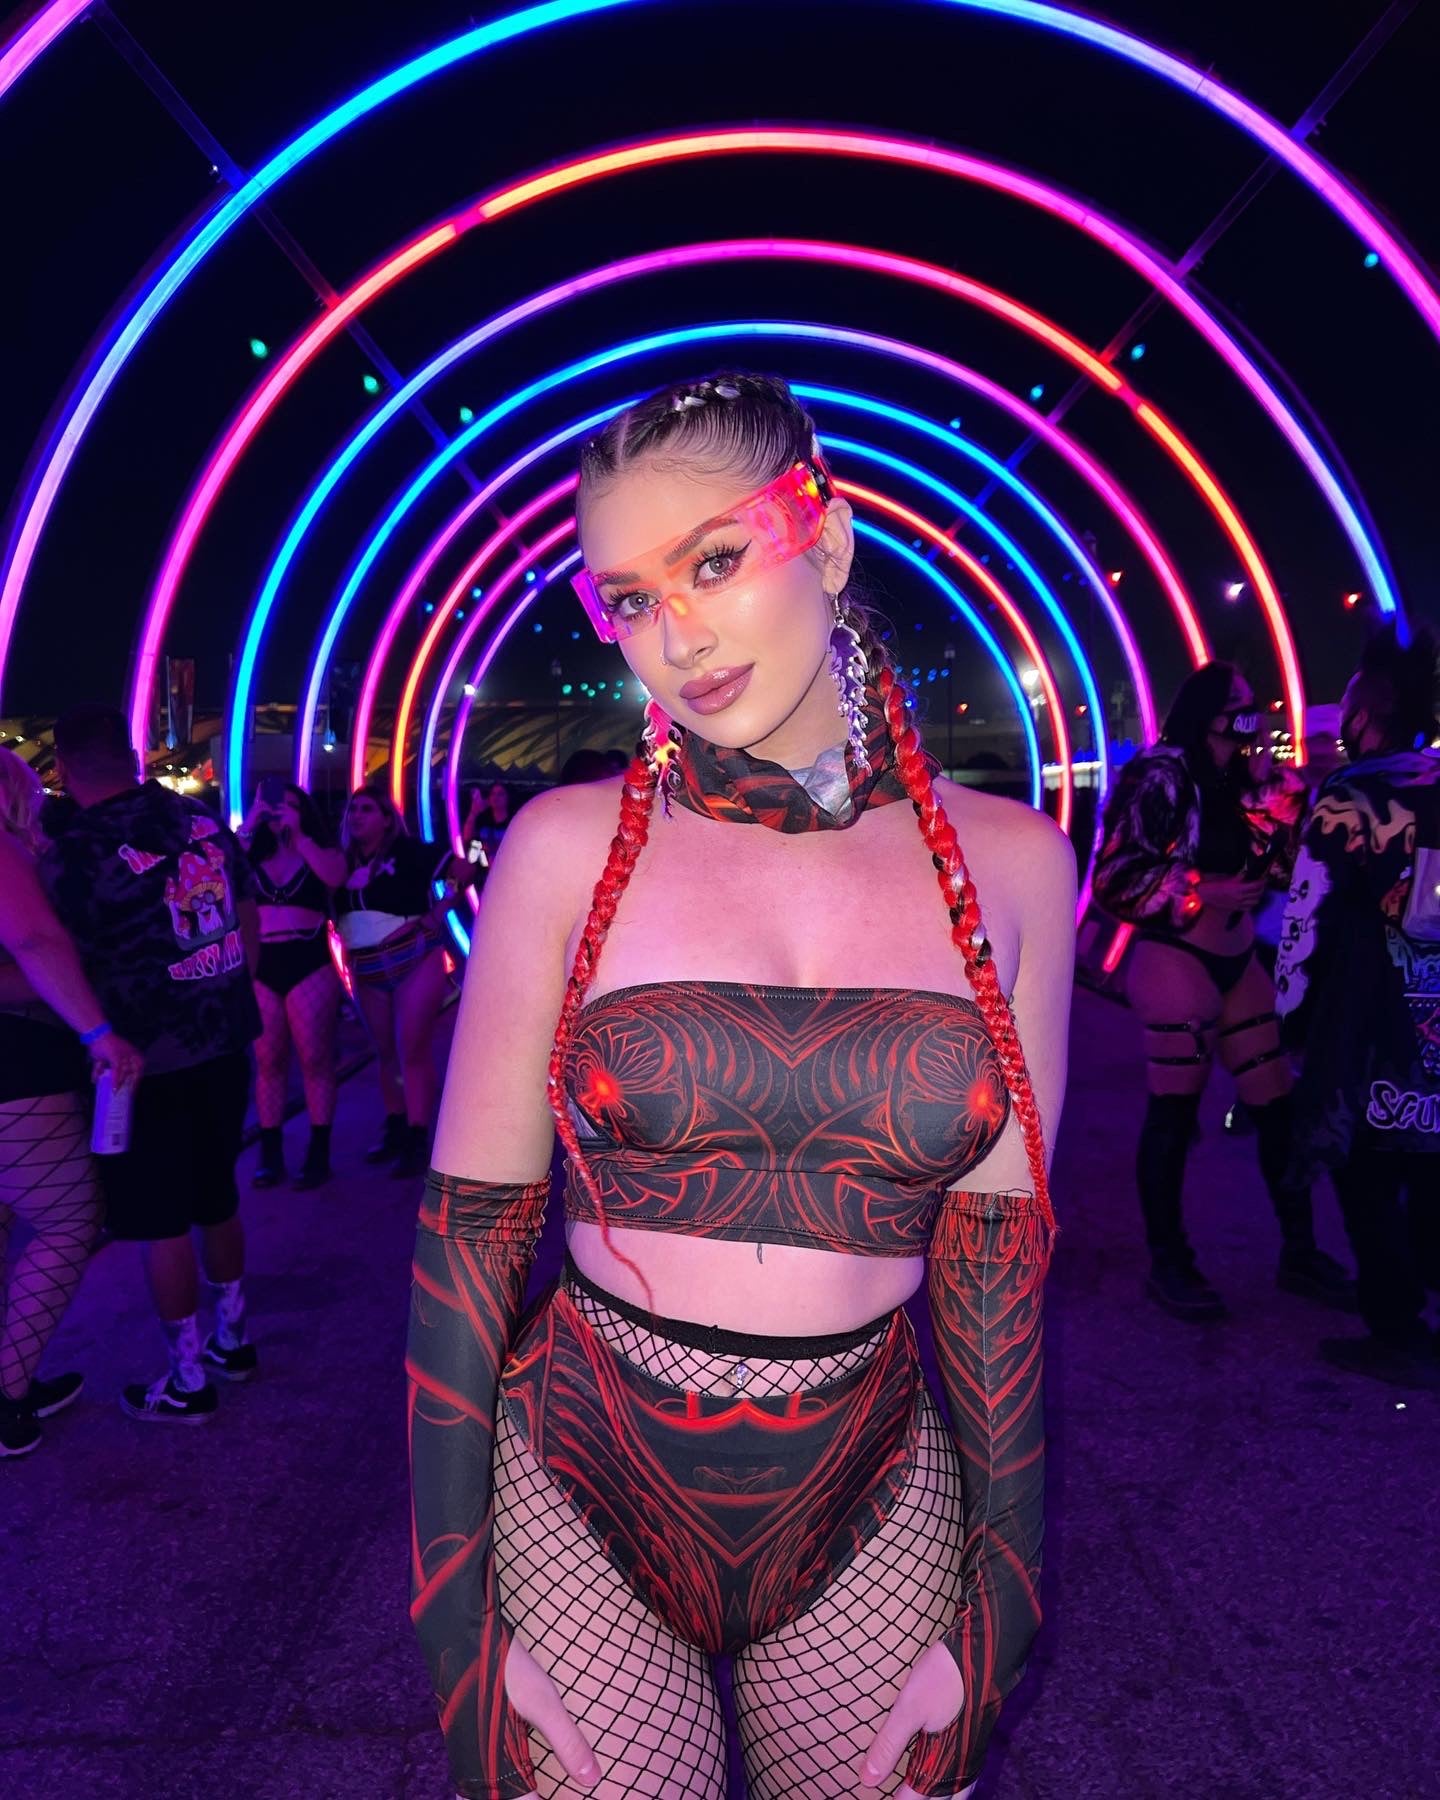 How To Create Your Own Rave Outfit, DIY Rave Outfits